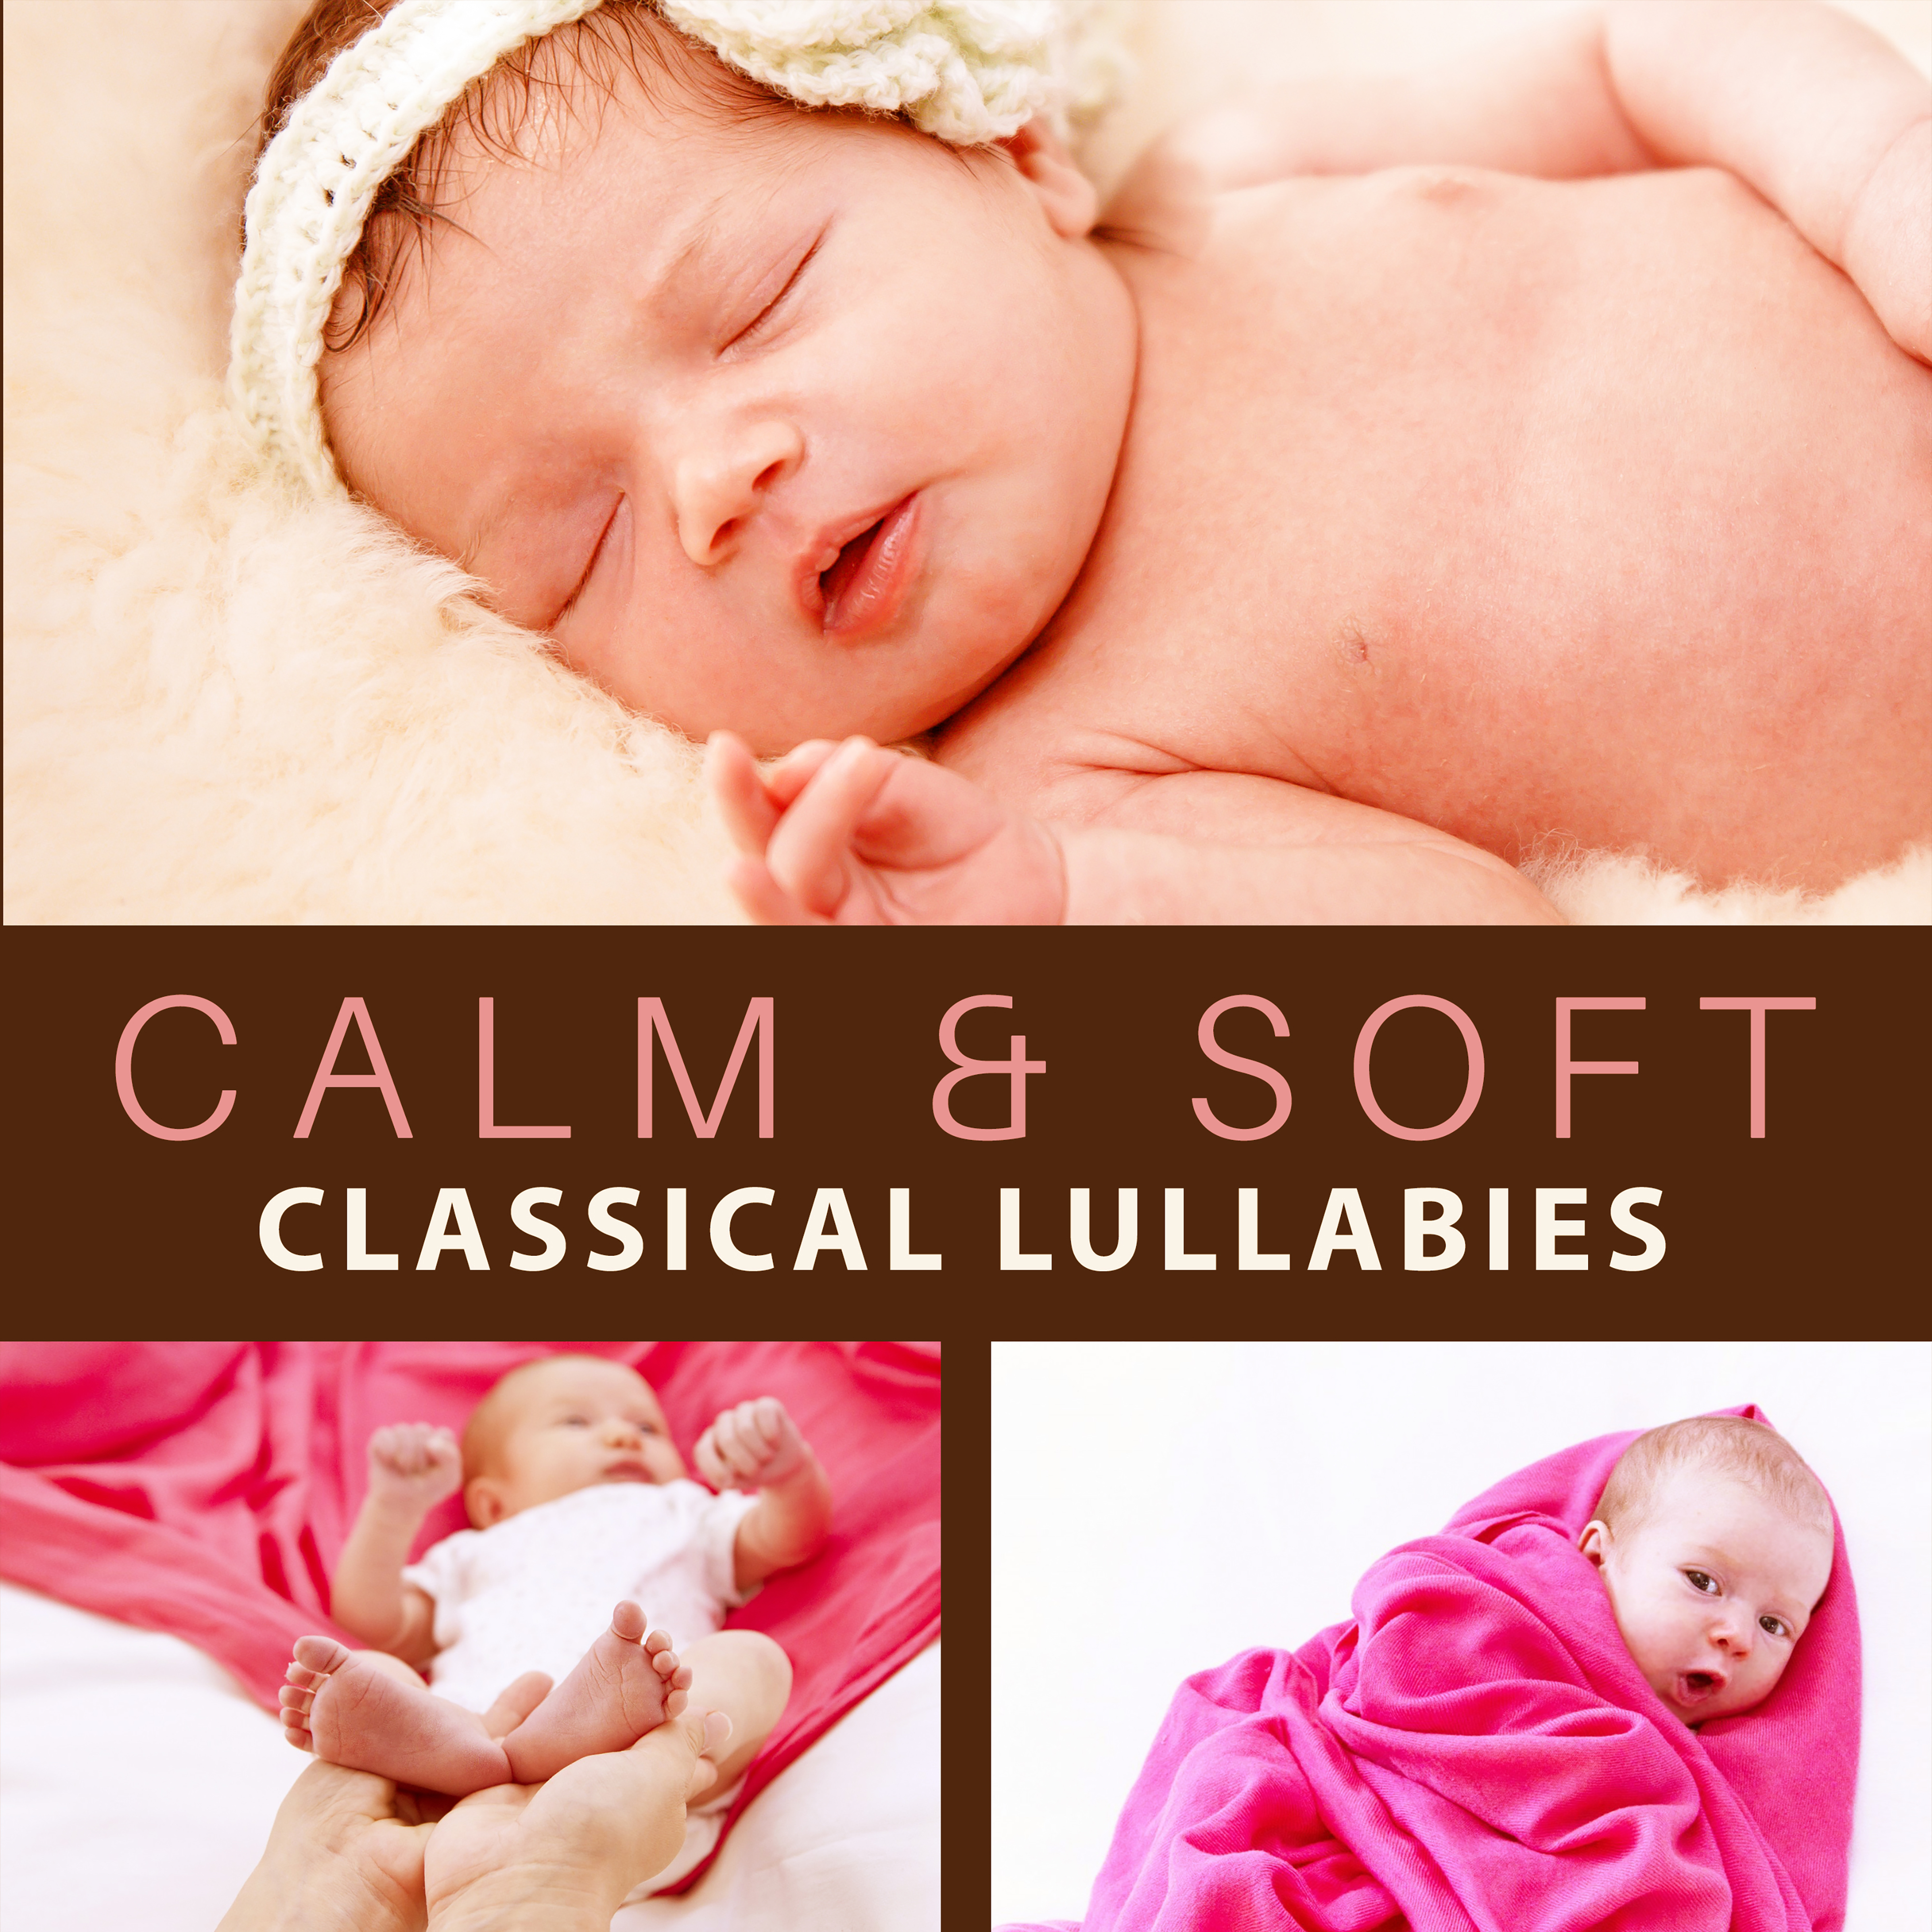 Calm  Soft Classical Lullabies  Soft Classical Music to Baby Sleep, Peaceful Classics Waves, No More Stress